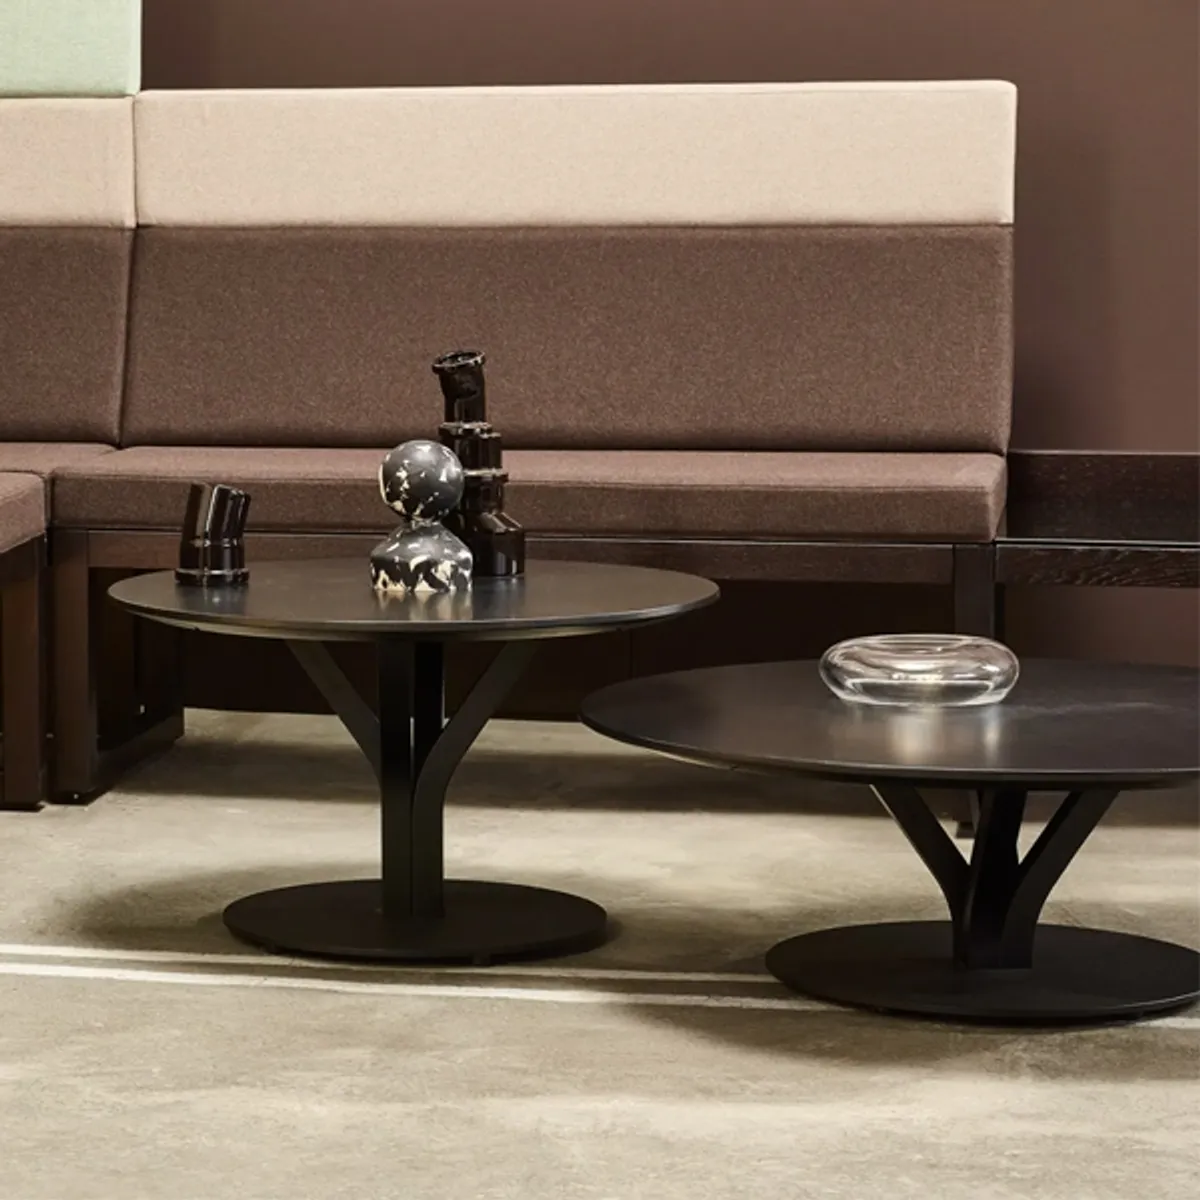 Albero round table Inside Out Contracts4